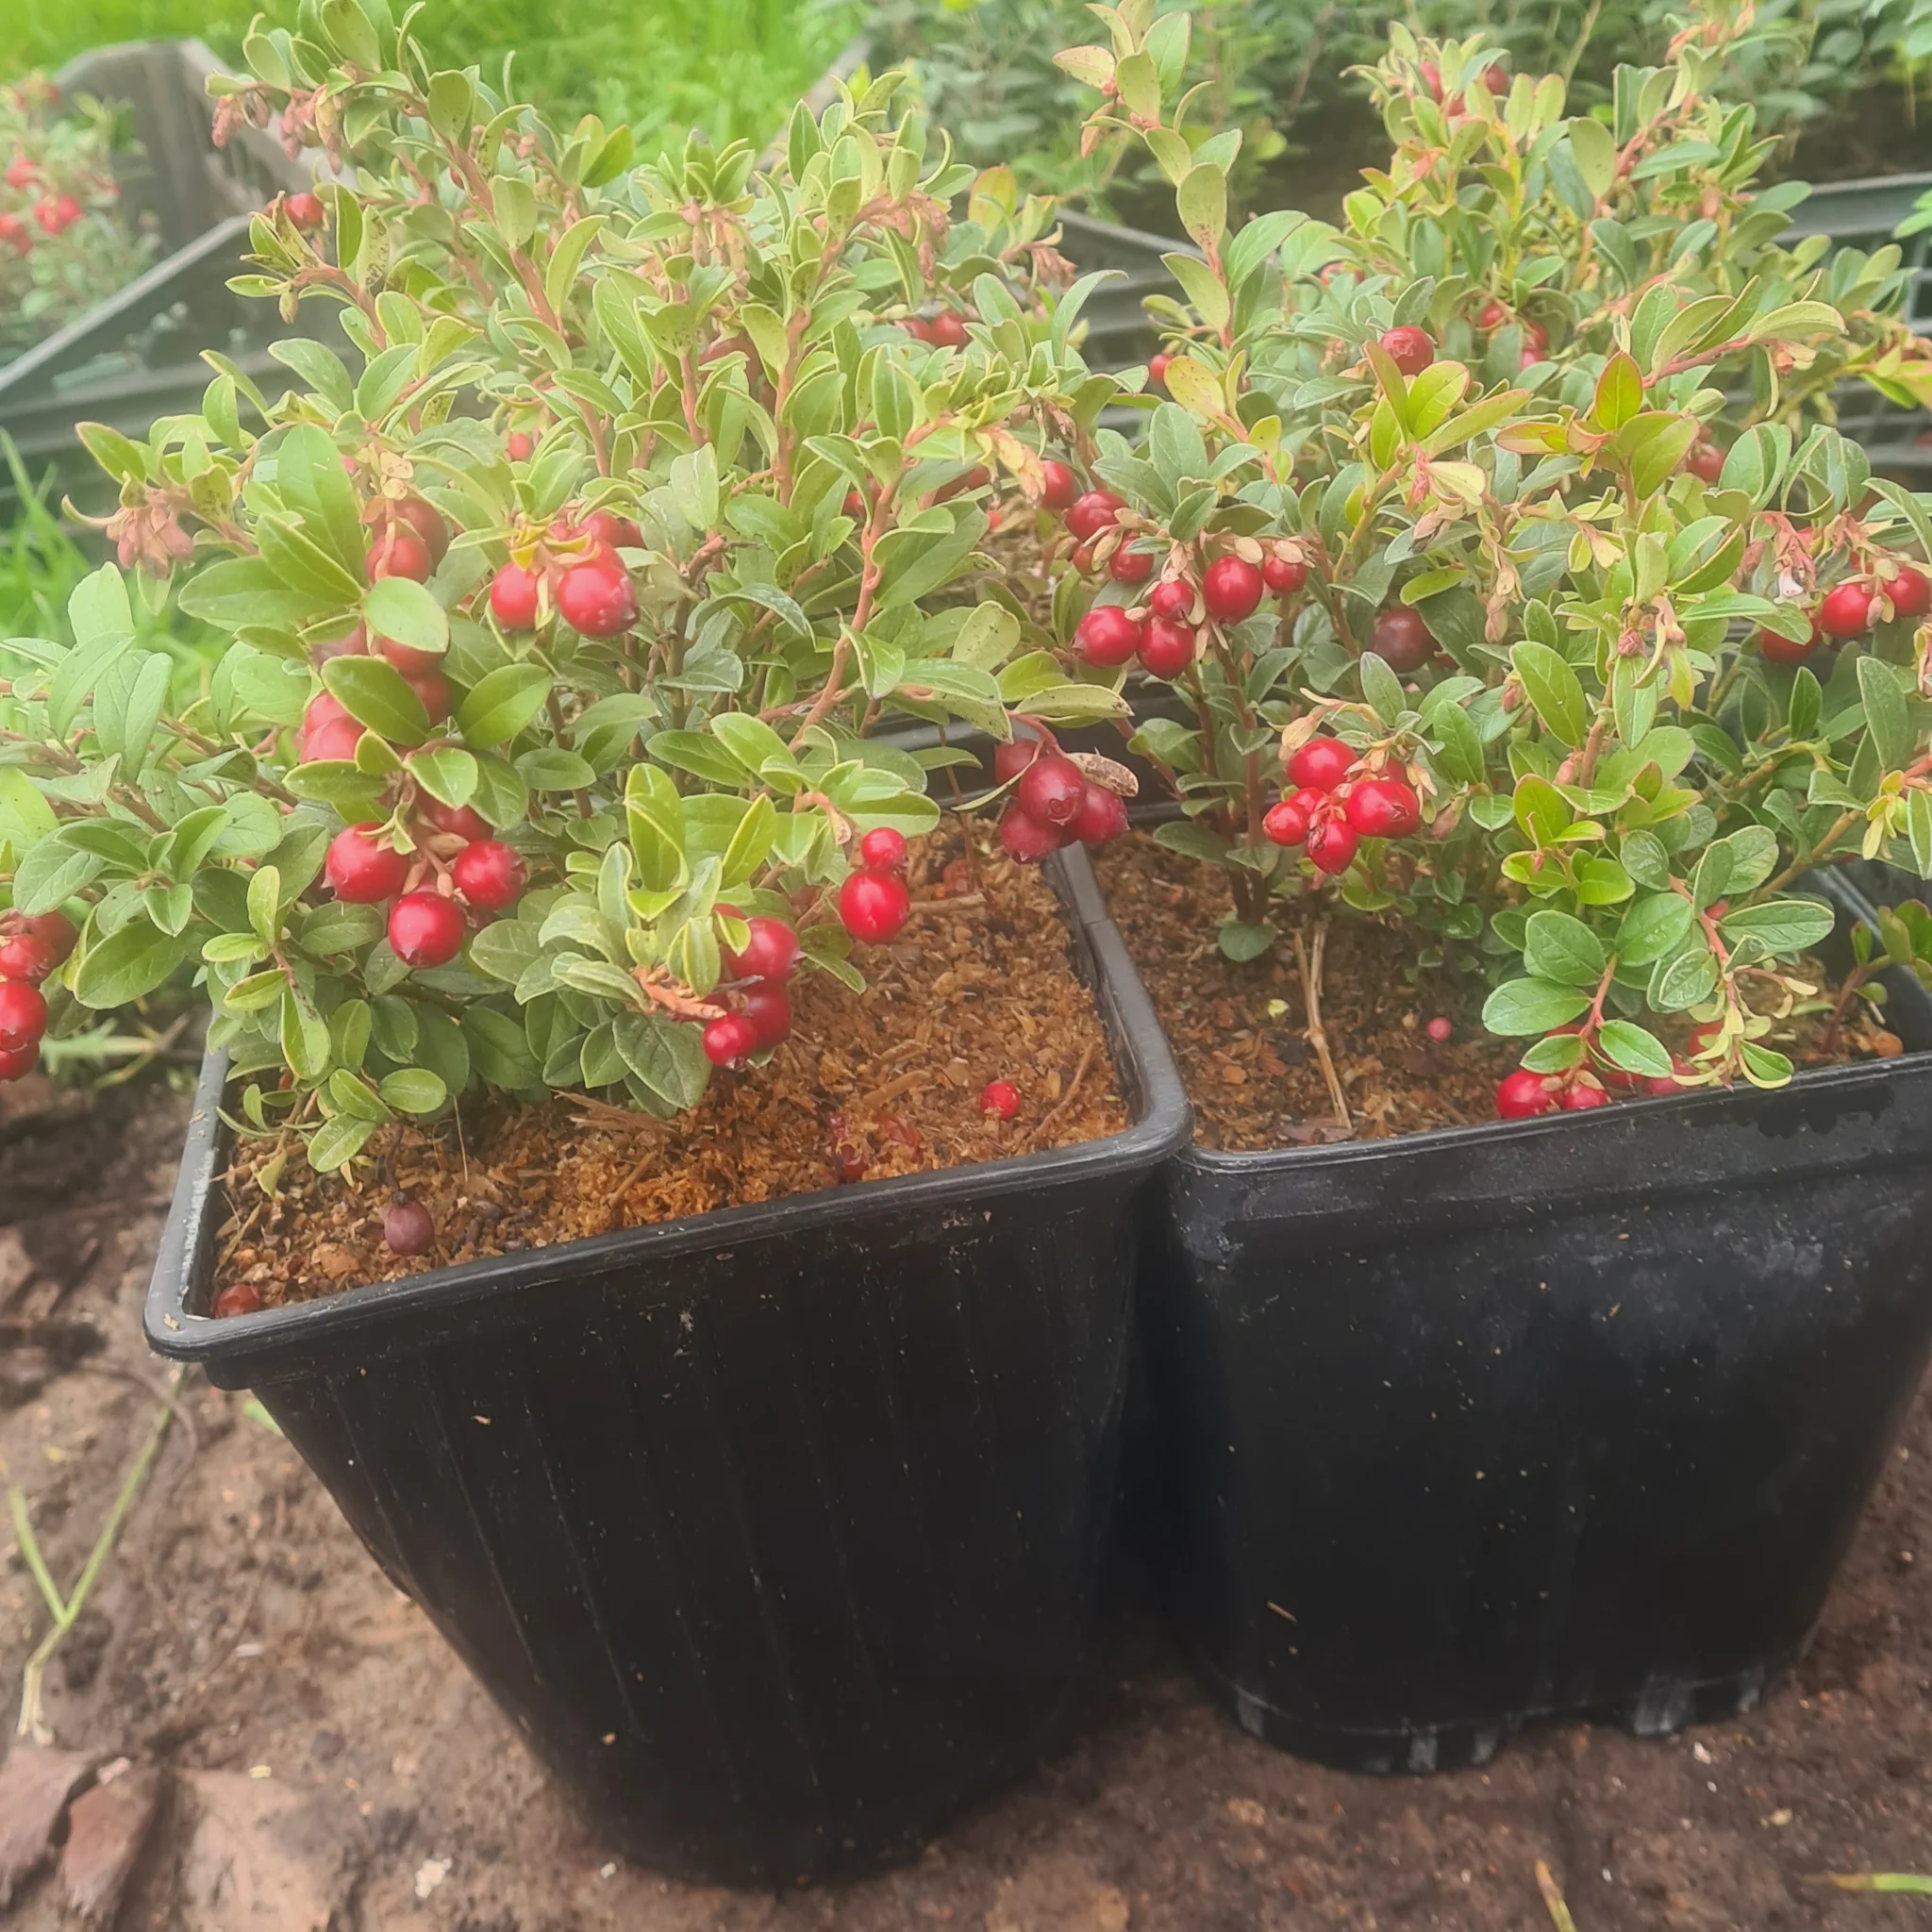 Cranberry seedlings of the Coral variety